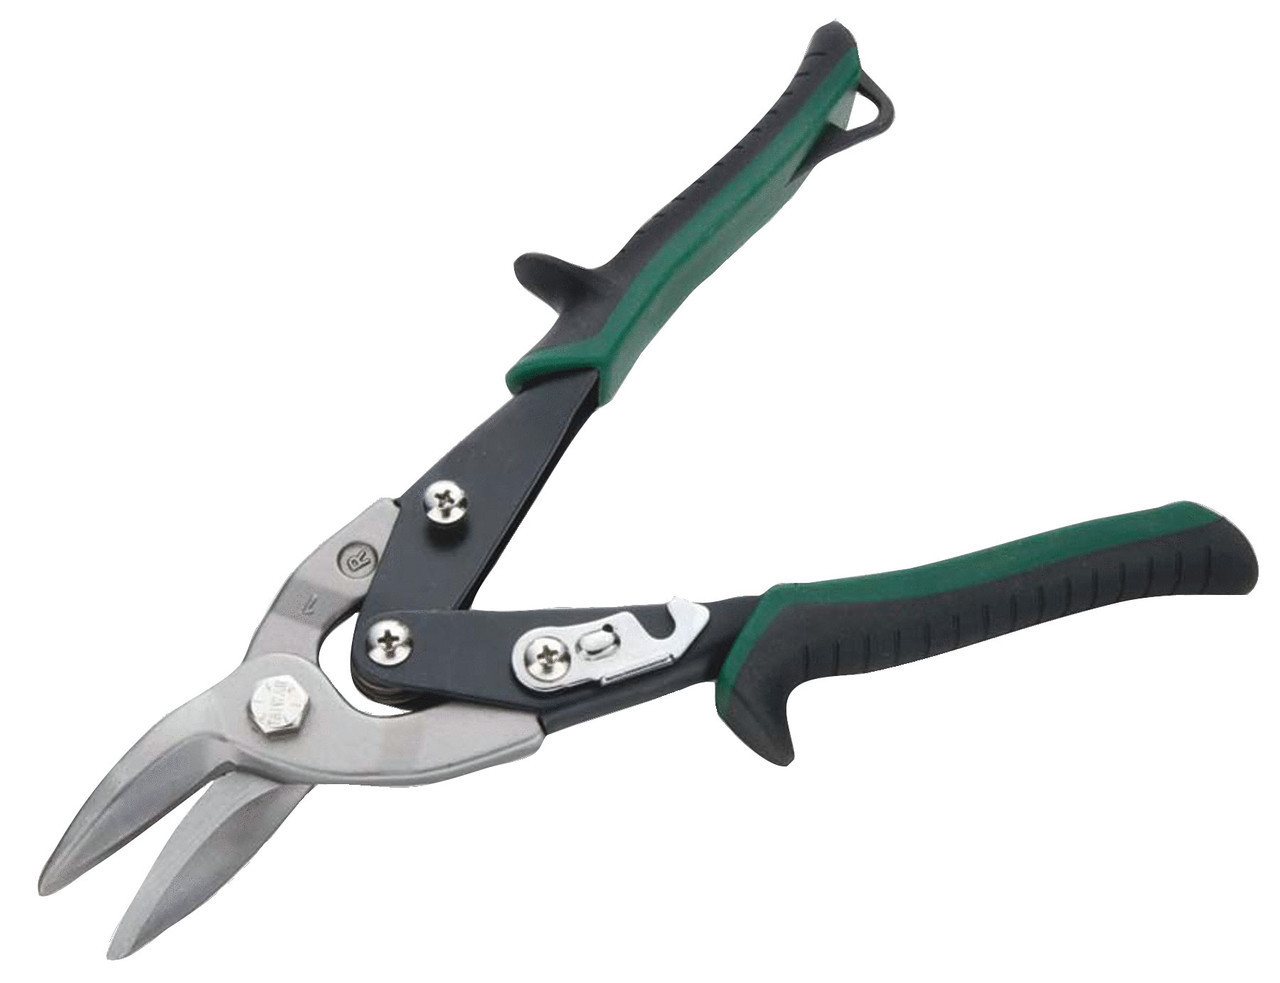 Williams 9 3/4 Williams Aviation Snips with Bi-Mold Comfort Grip Handle - JHW28203